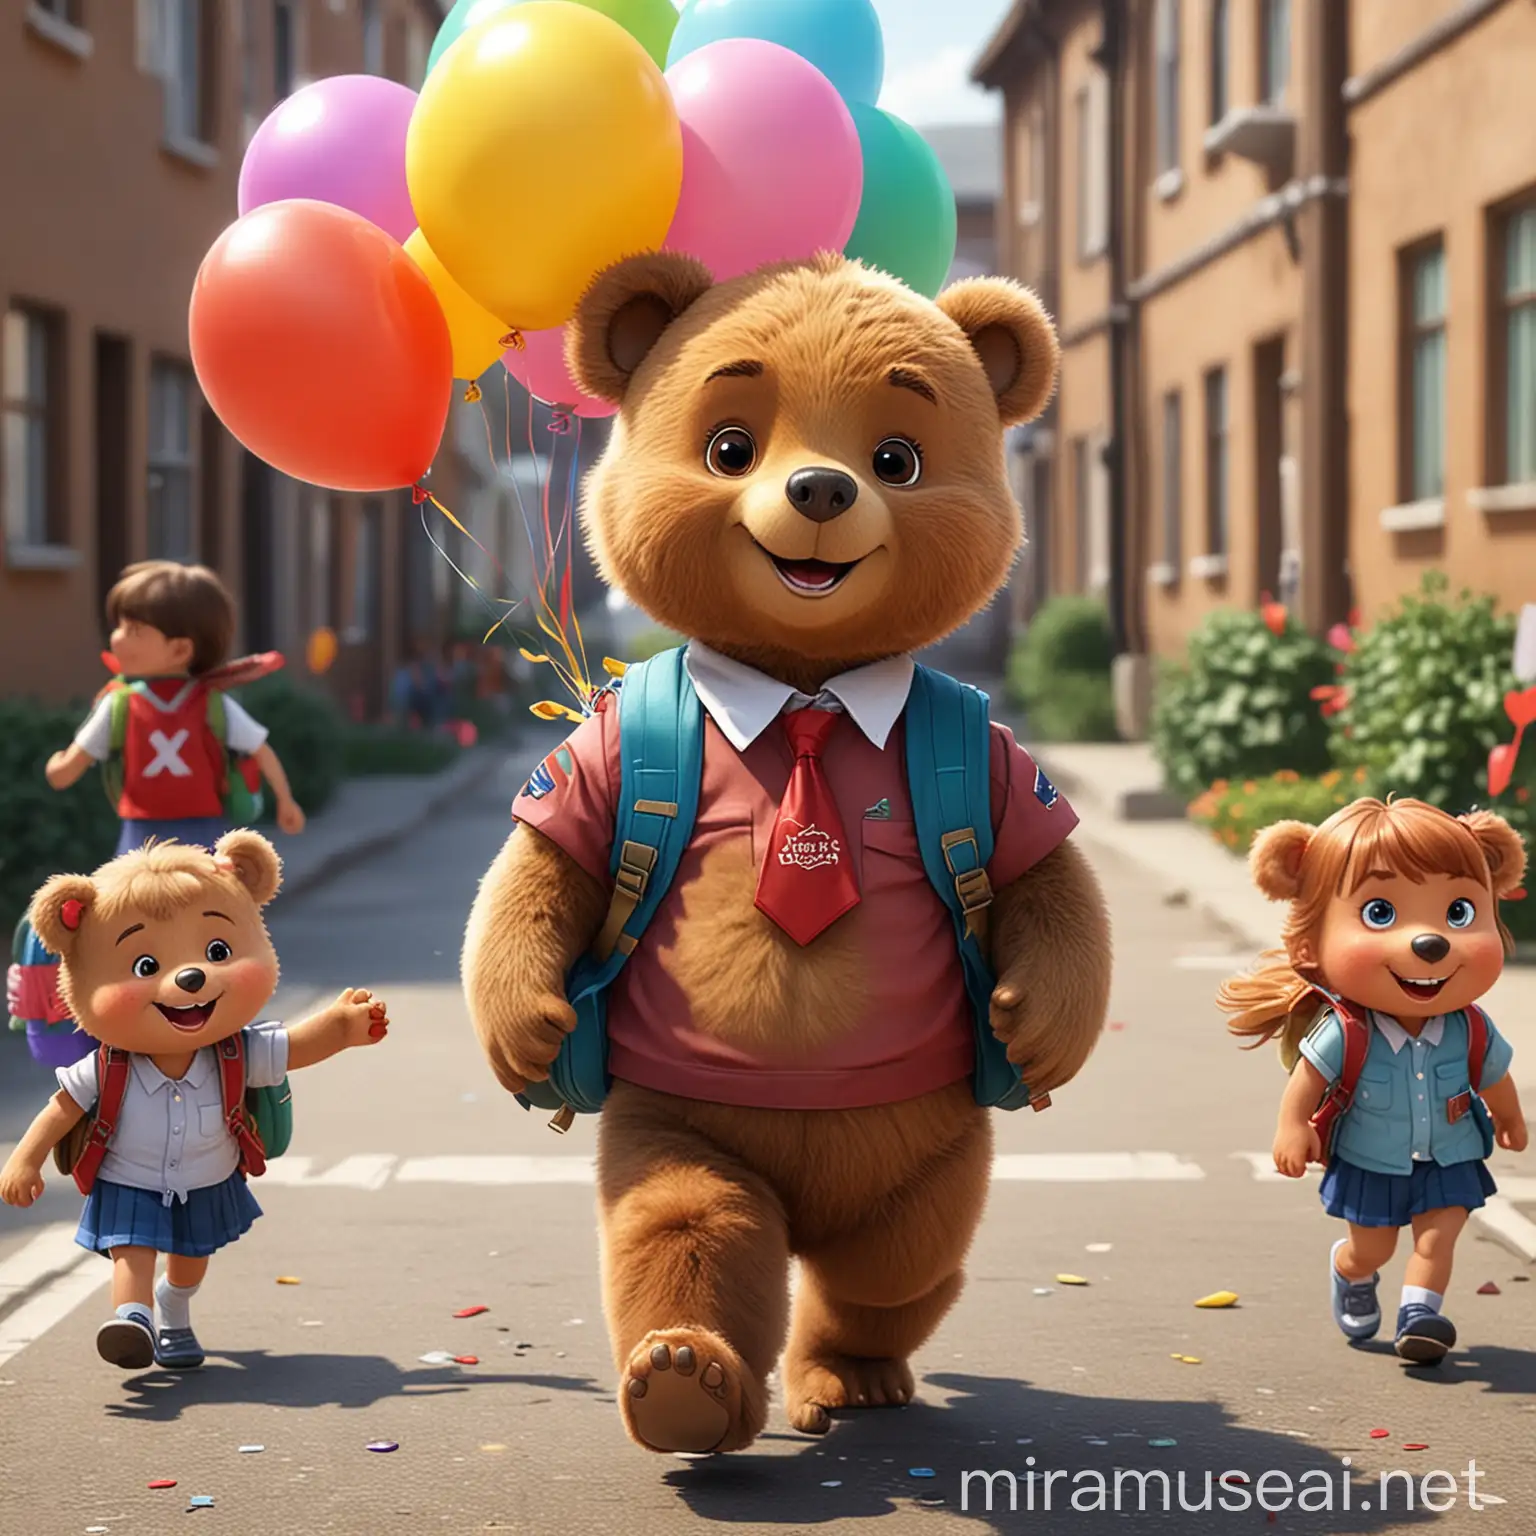 Make a cartoon picture in a cute war of a cute little brown bear wearing a happy and smiling school uniform going to school with some colorful balloons in his hand and a small backpack with the rest of his friends who are also wearing school uniforms.